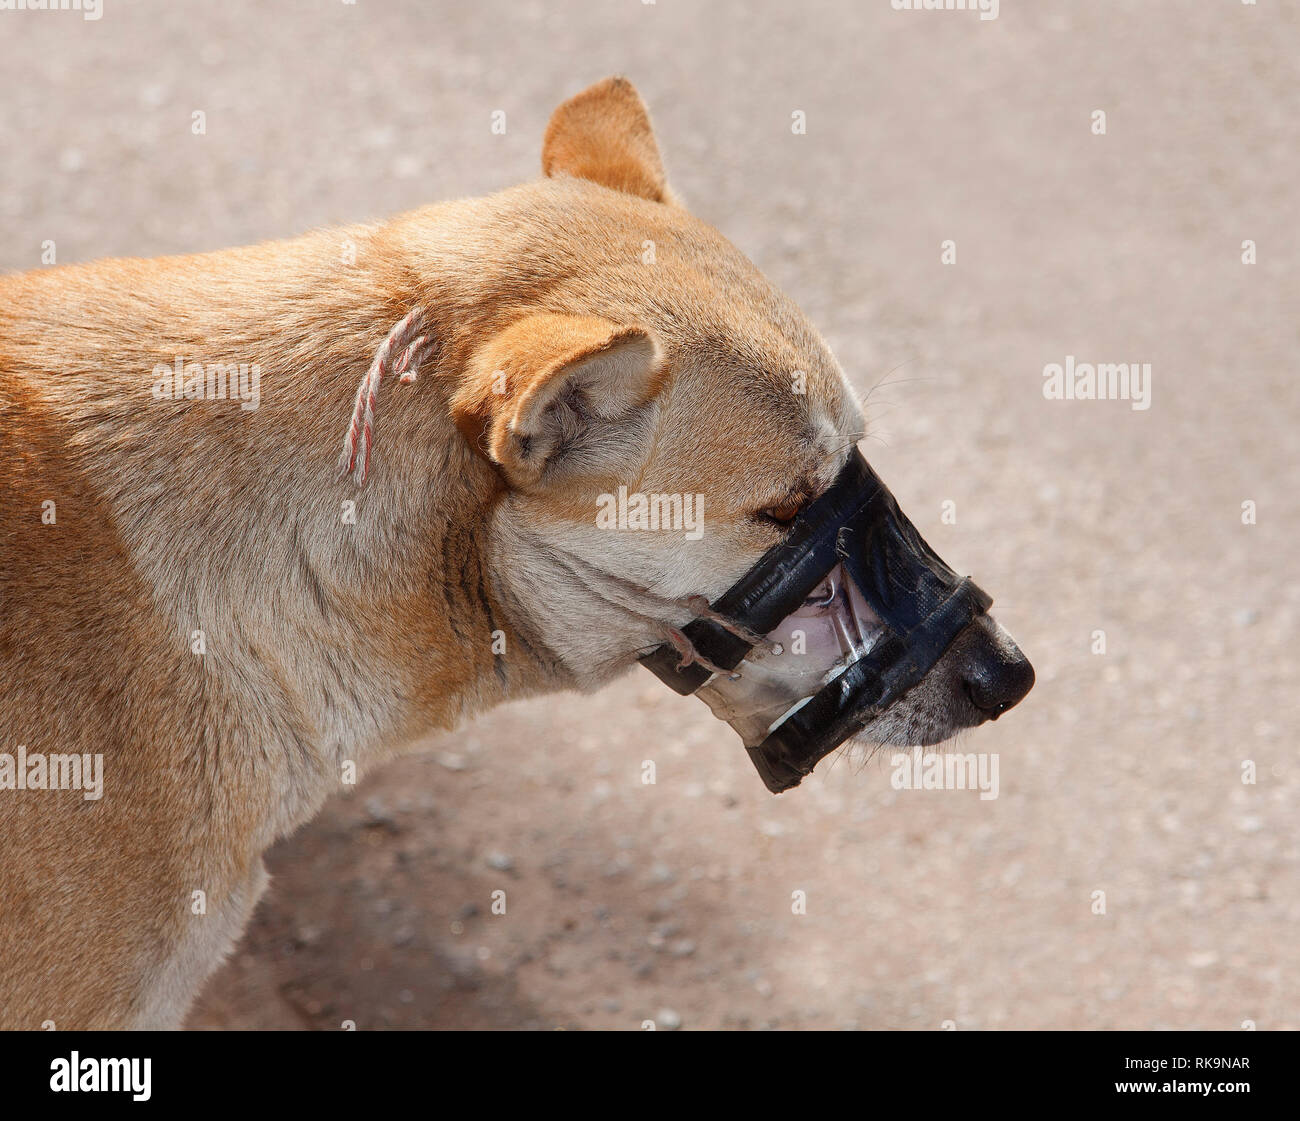 Snappy dog with an unusual muzzle in Thailand Stock Photo